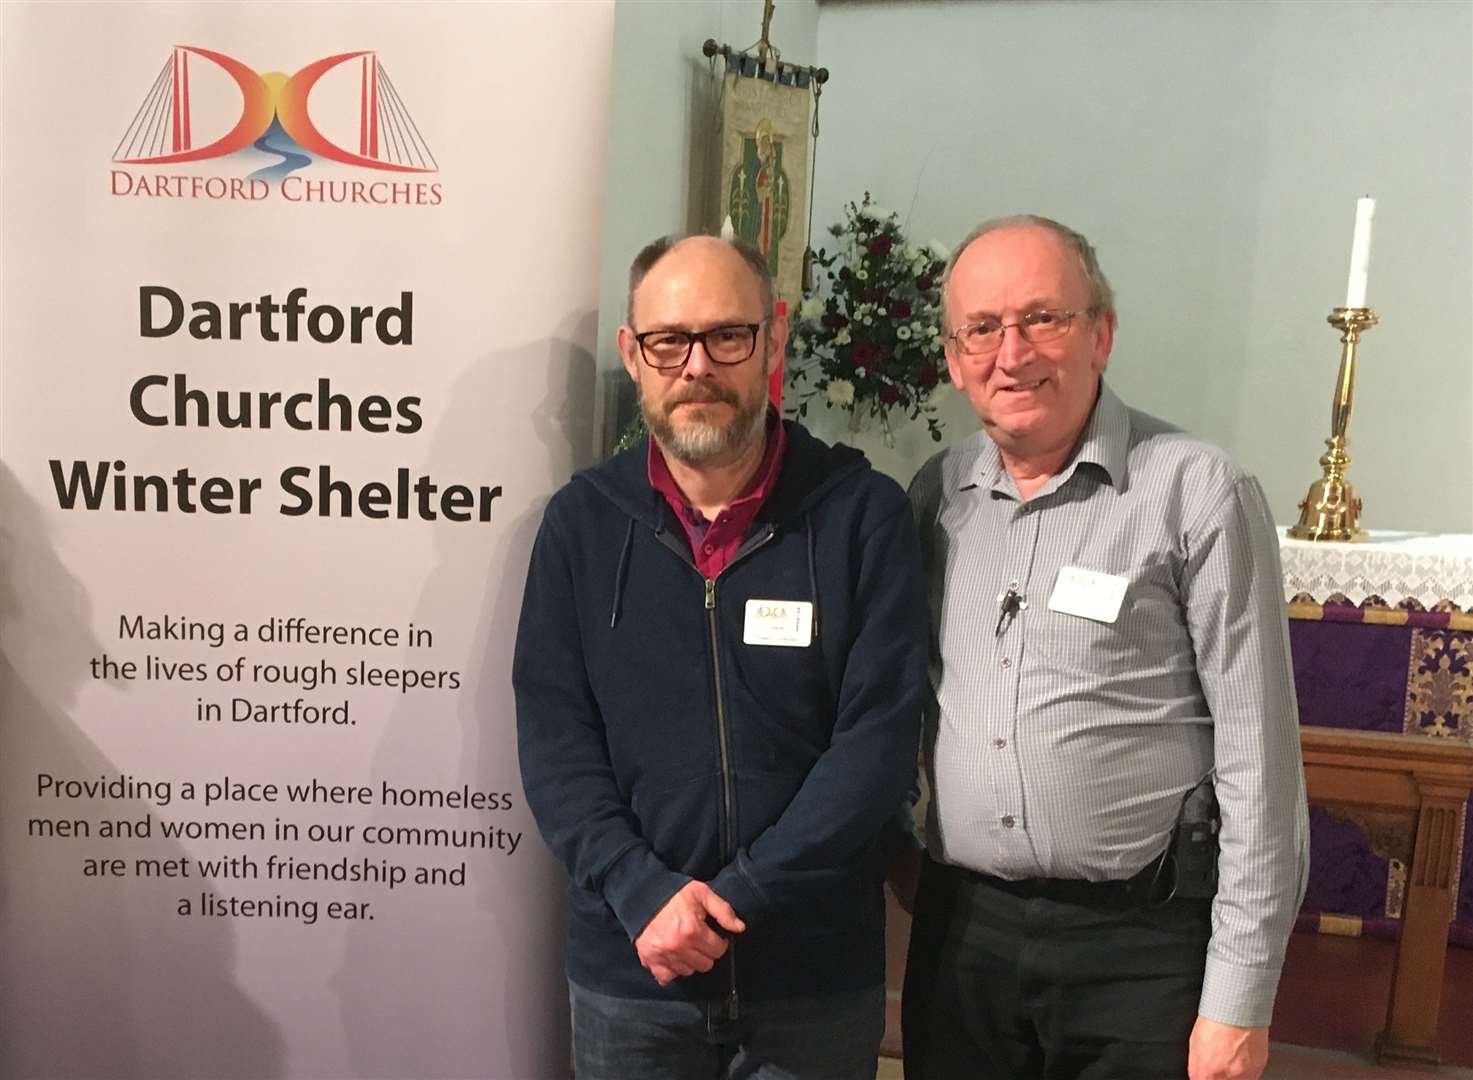 Dartford Churches Winter Shelter project worker, Steve Ives, and right, project administrator Michael Smith